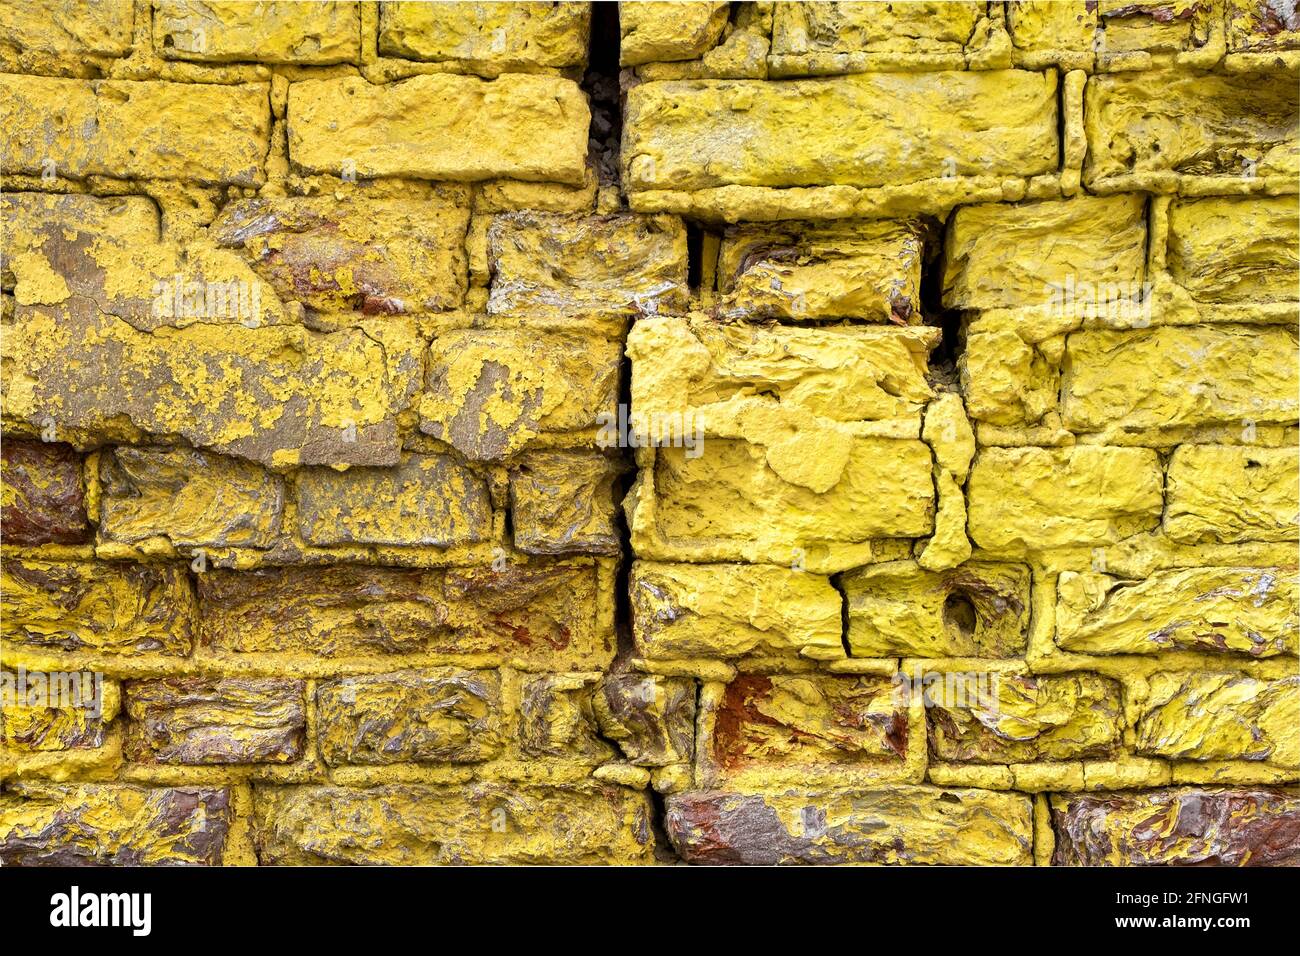 Close-up of a fragment of an old wall with bright yellow brickwork Stock Photo